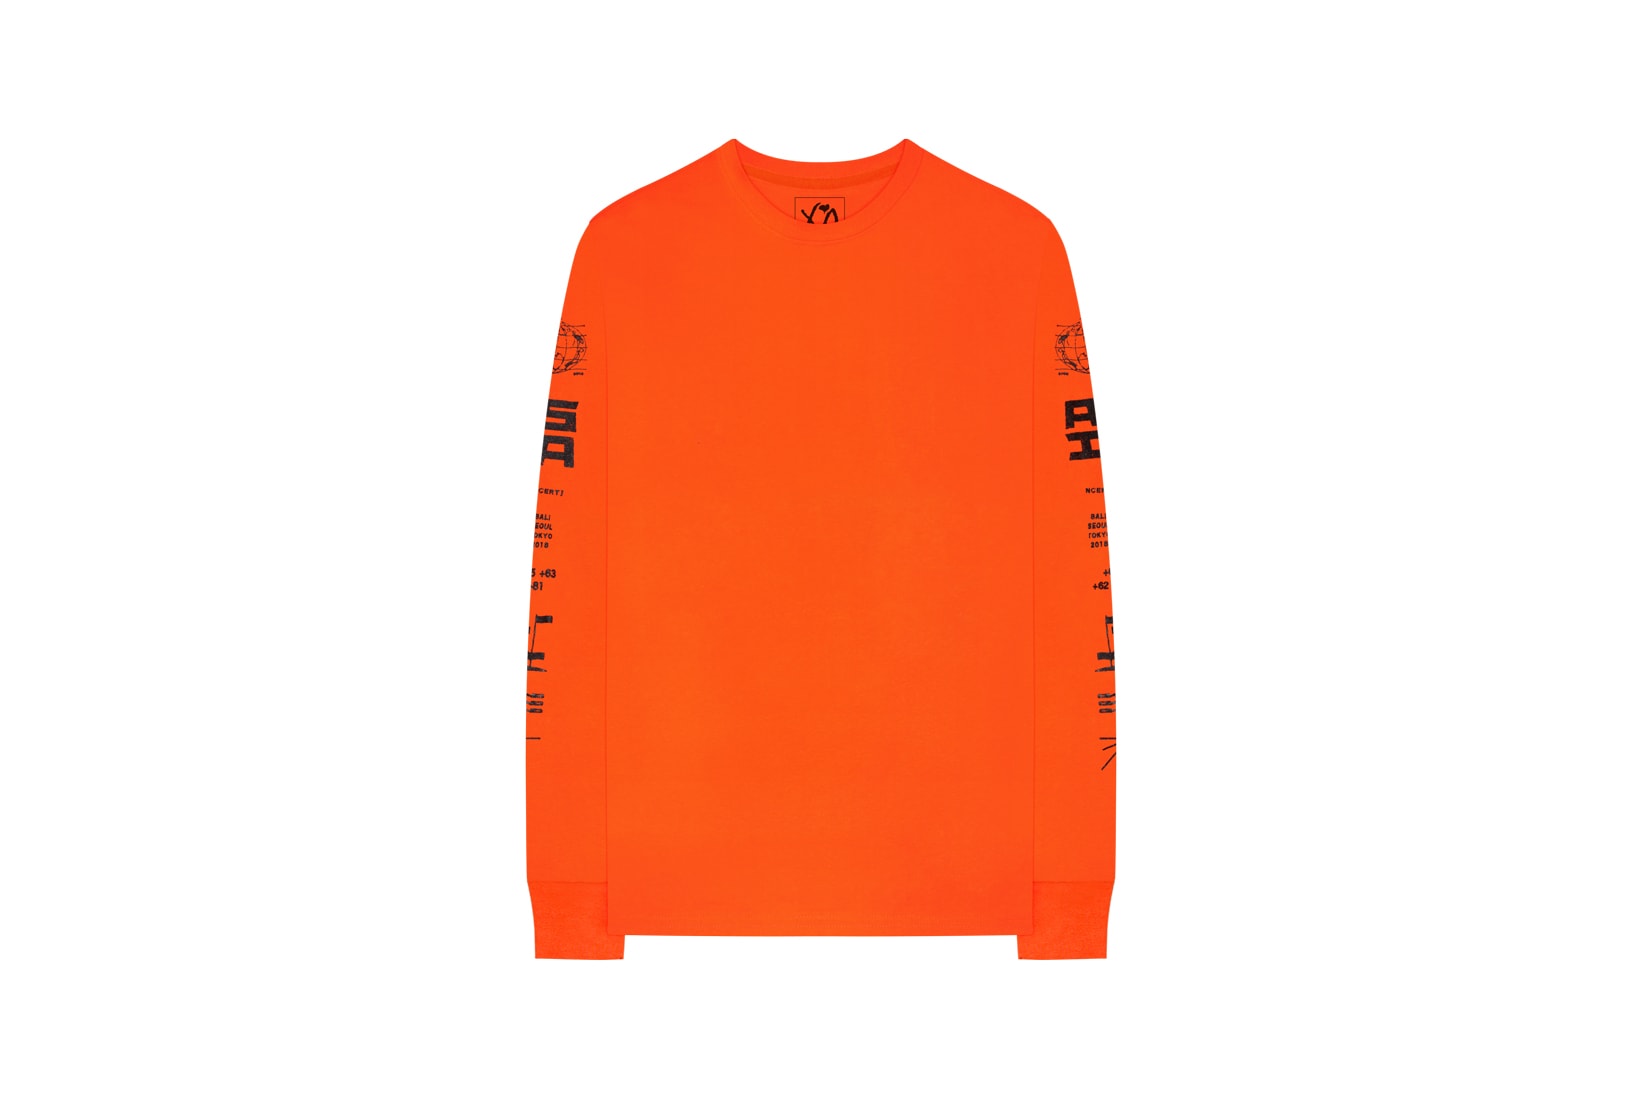 The Weeknd Asia Tour Merch Collection Long Sleeved Shirt Orange